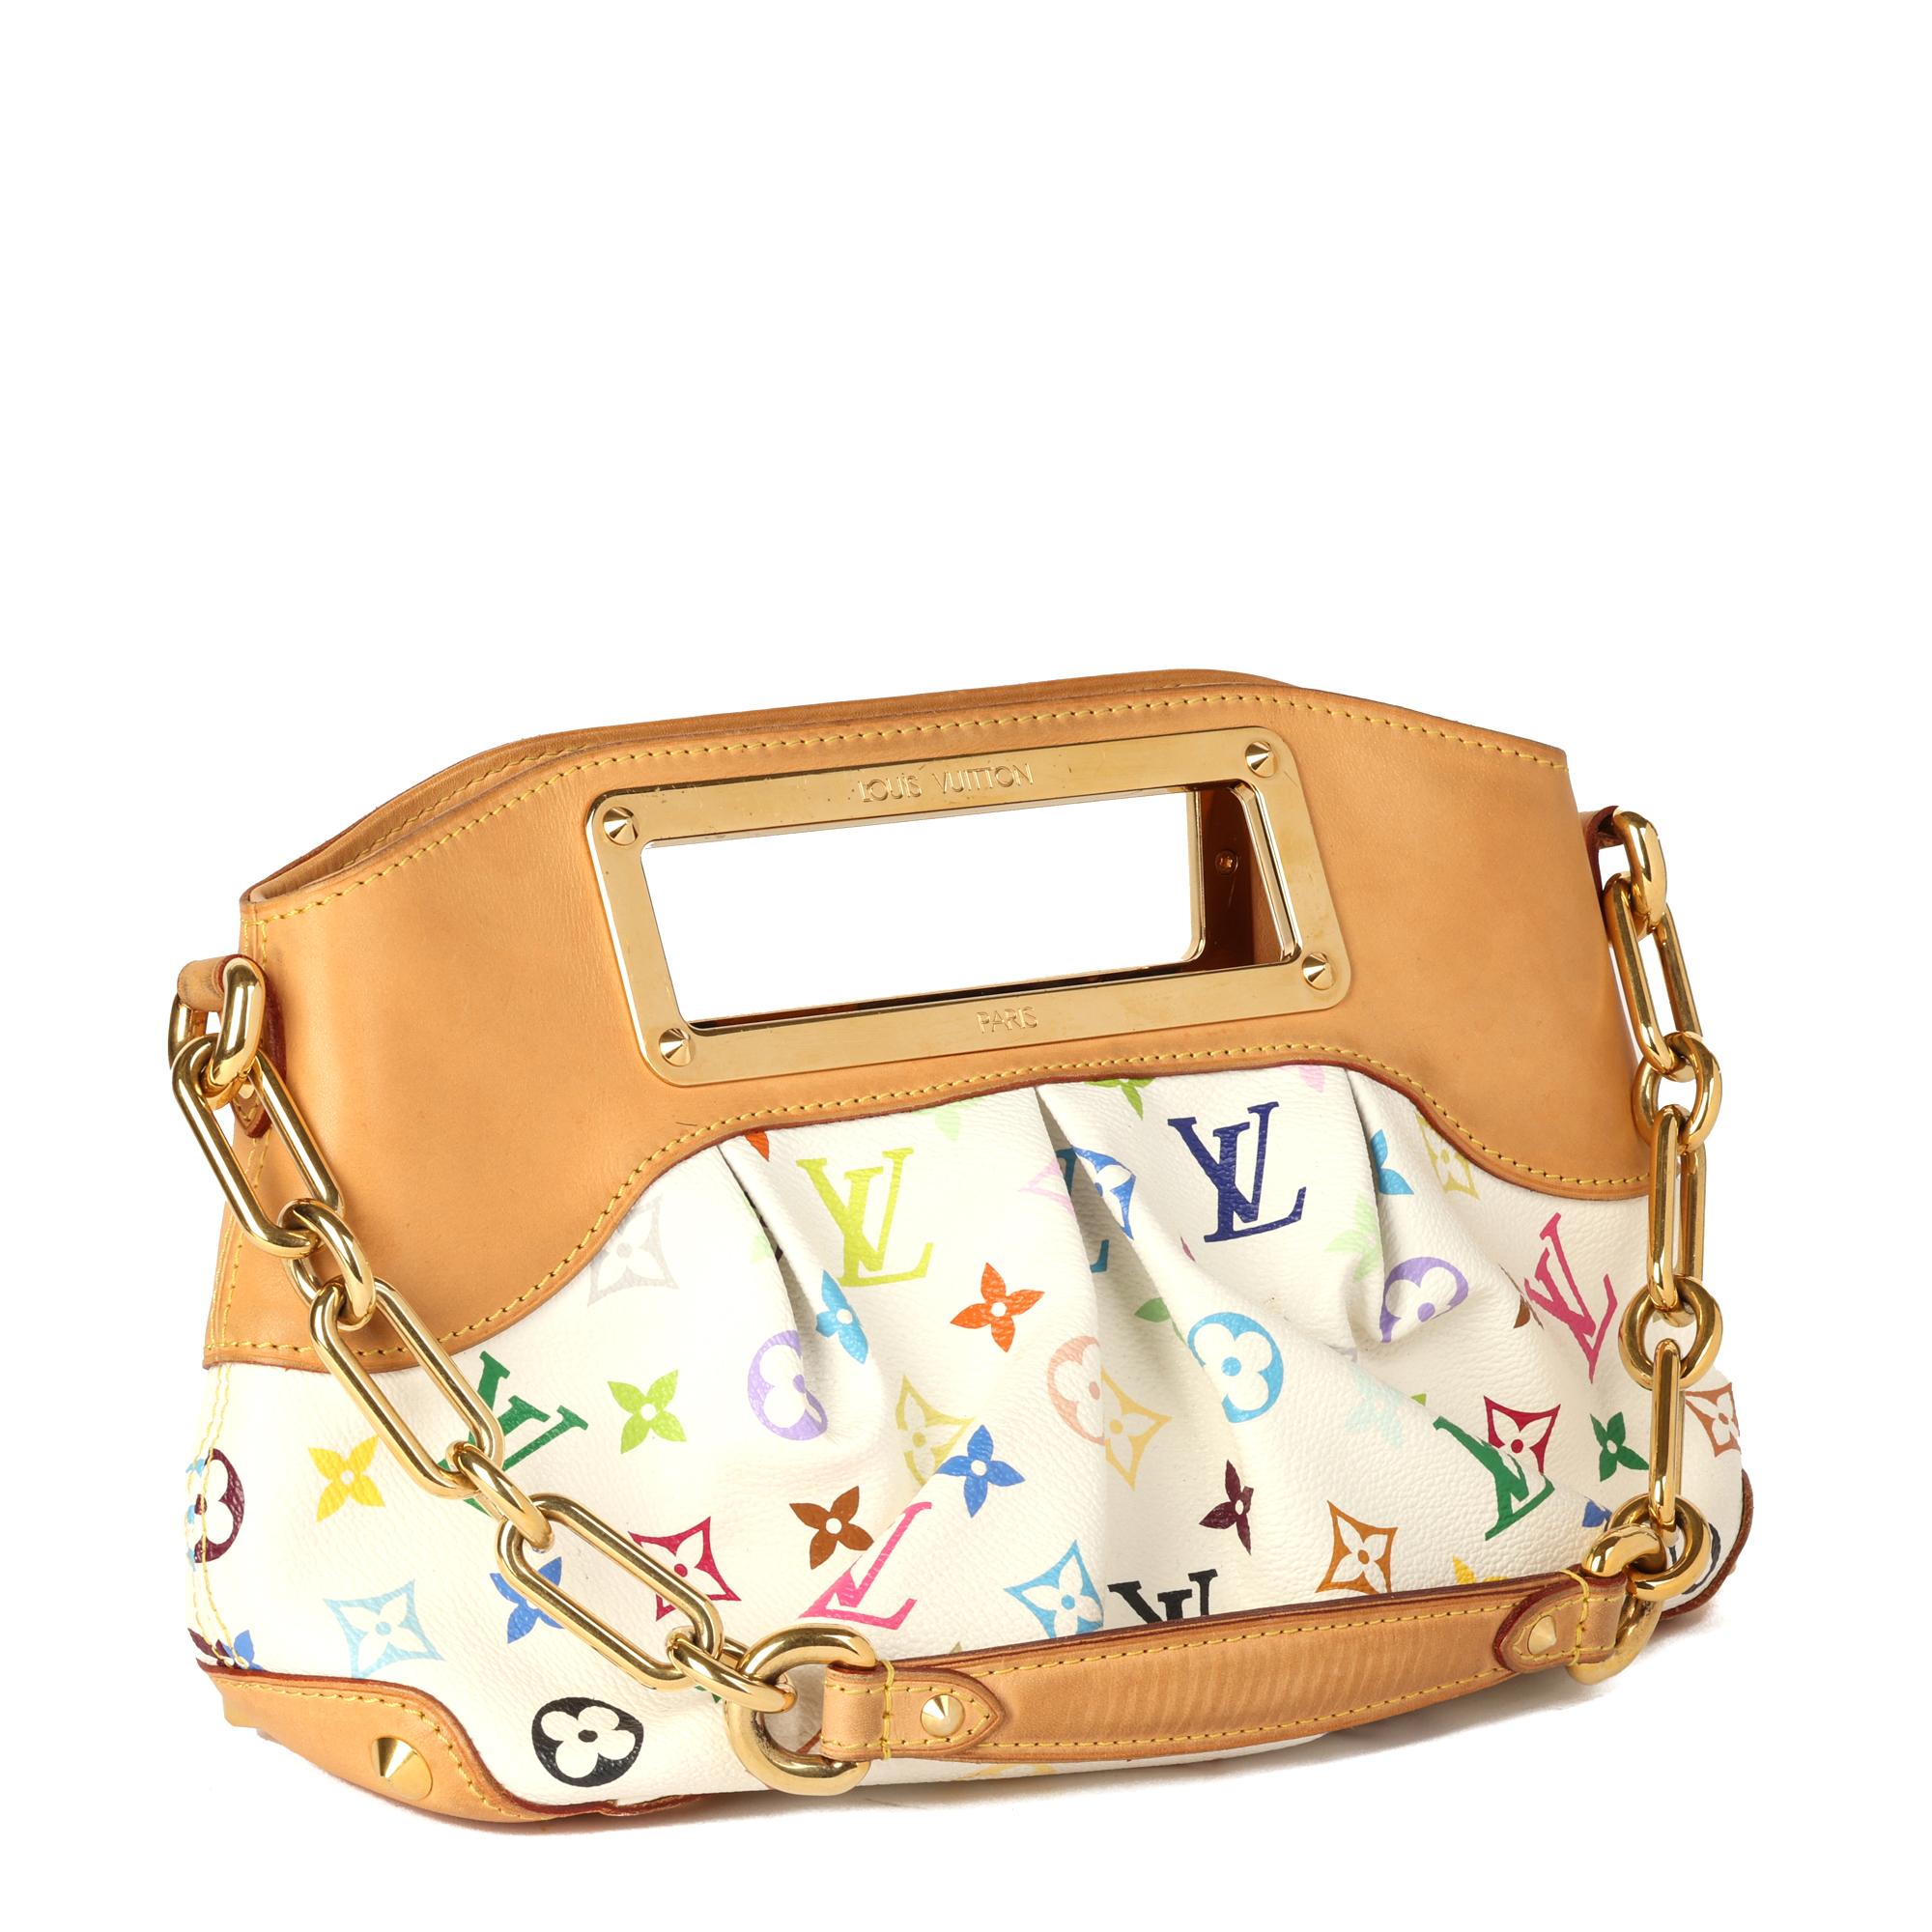 LOUIS VUITTON
White Multicolour Coated Canvas & Vachetta Leather Judy PM

Serial Number: TH3059
Age (Circa): 2009
Accompanied By: Louis Vuitton Dust Bag
Authenticity Details: Date Stamp (Made in France)
Gender: Ladies
Type: Tote, Top Handle

Colour: